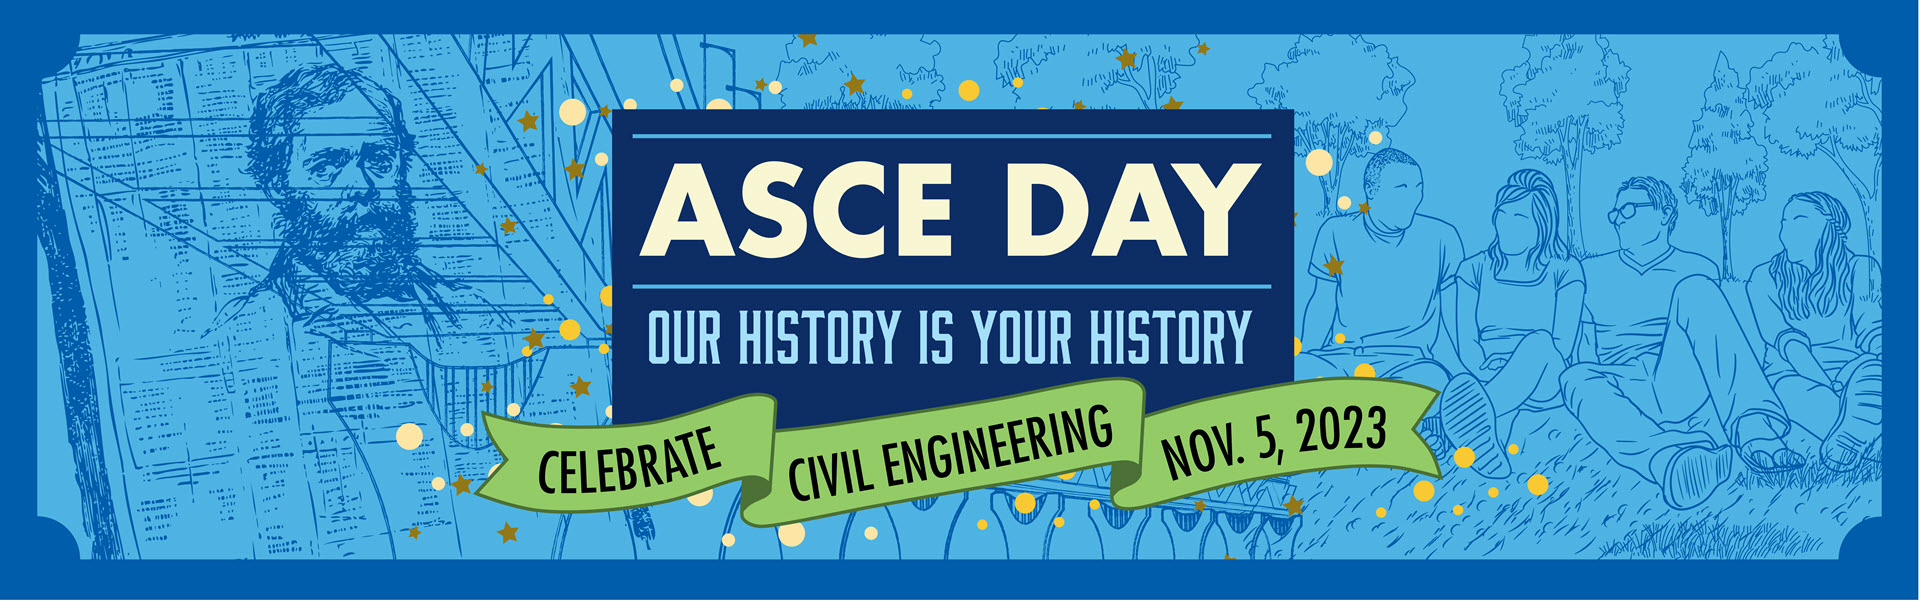 graphic for ASCE Day 2023 - ASCE Day Our history is your history. Celebrate civil engineering Nov. 5, 2023